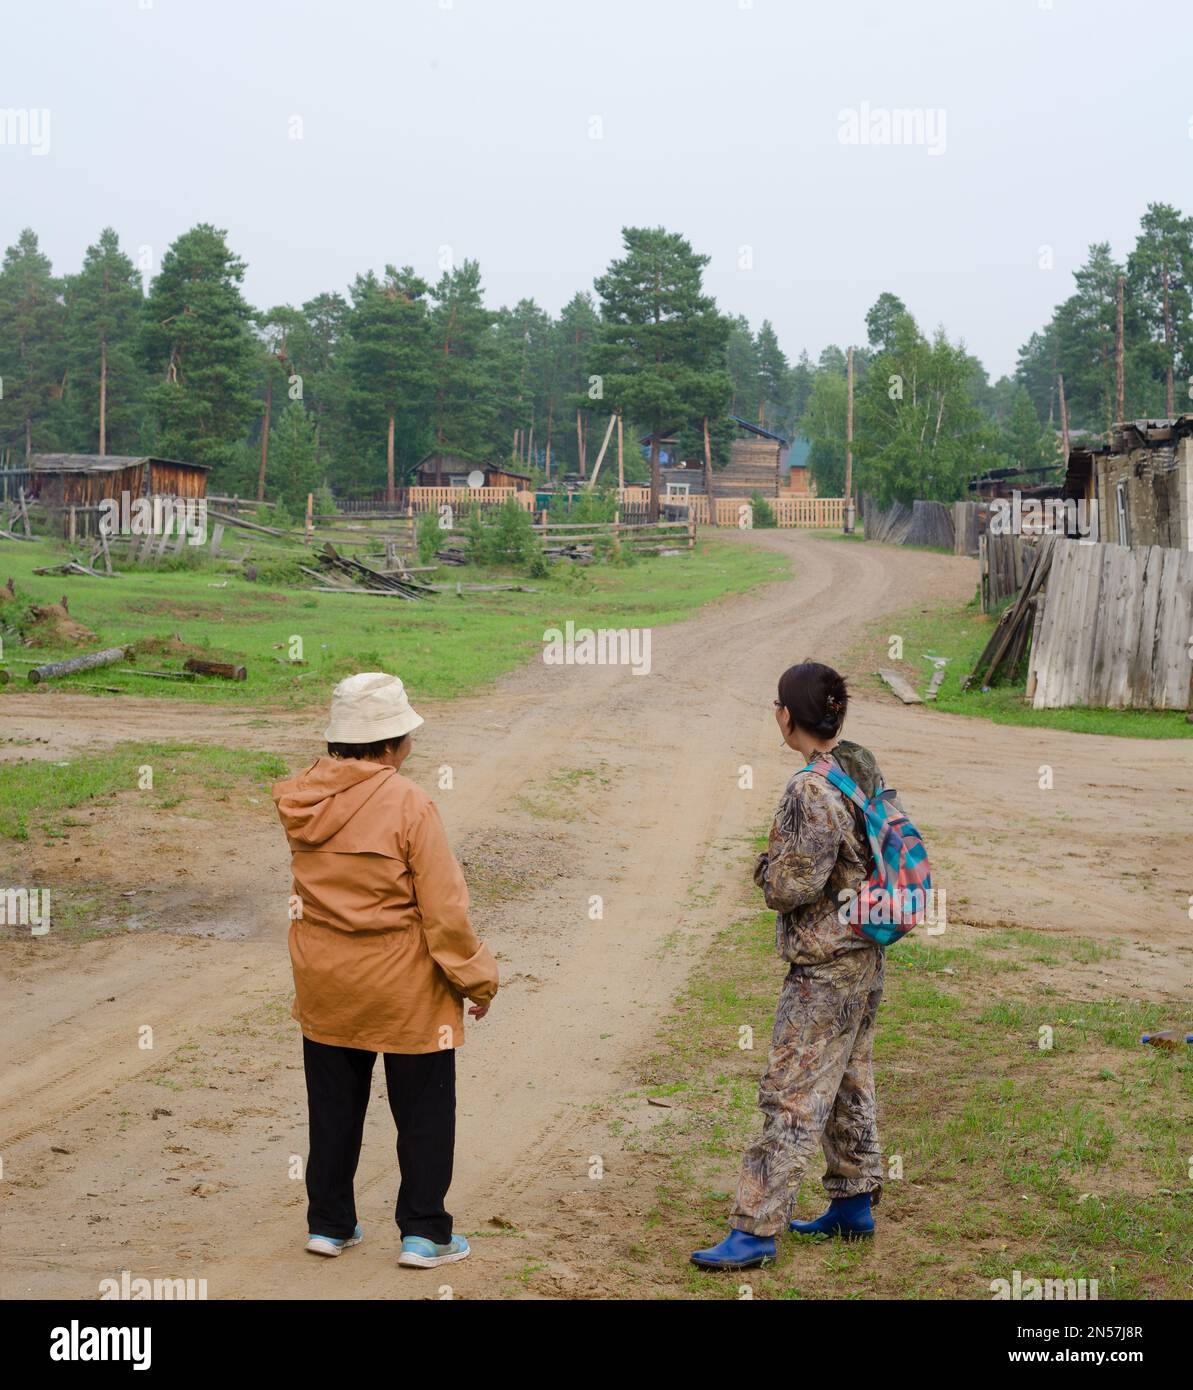 A Yakut couple an elderly woman in Panama and a young Yakut girl look at the country road to the villages near the forest before choosing a path. Stock Photo